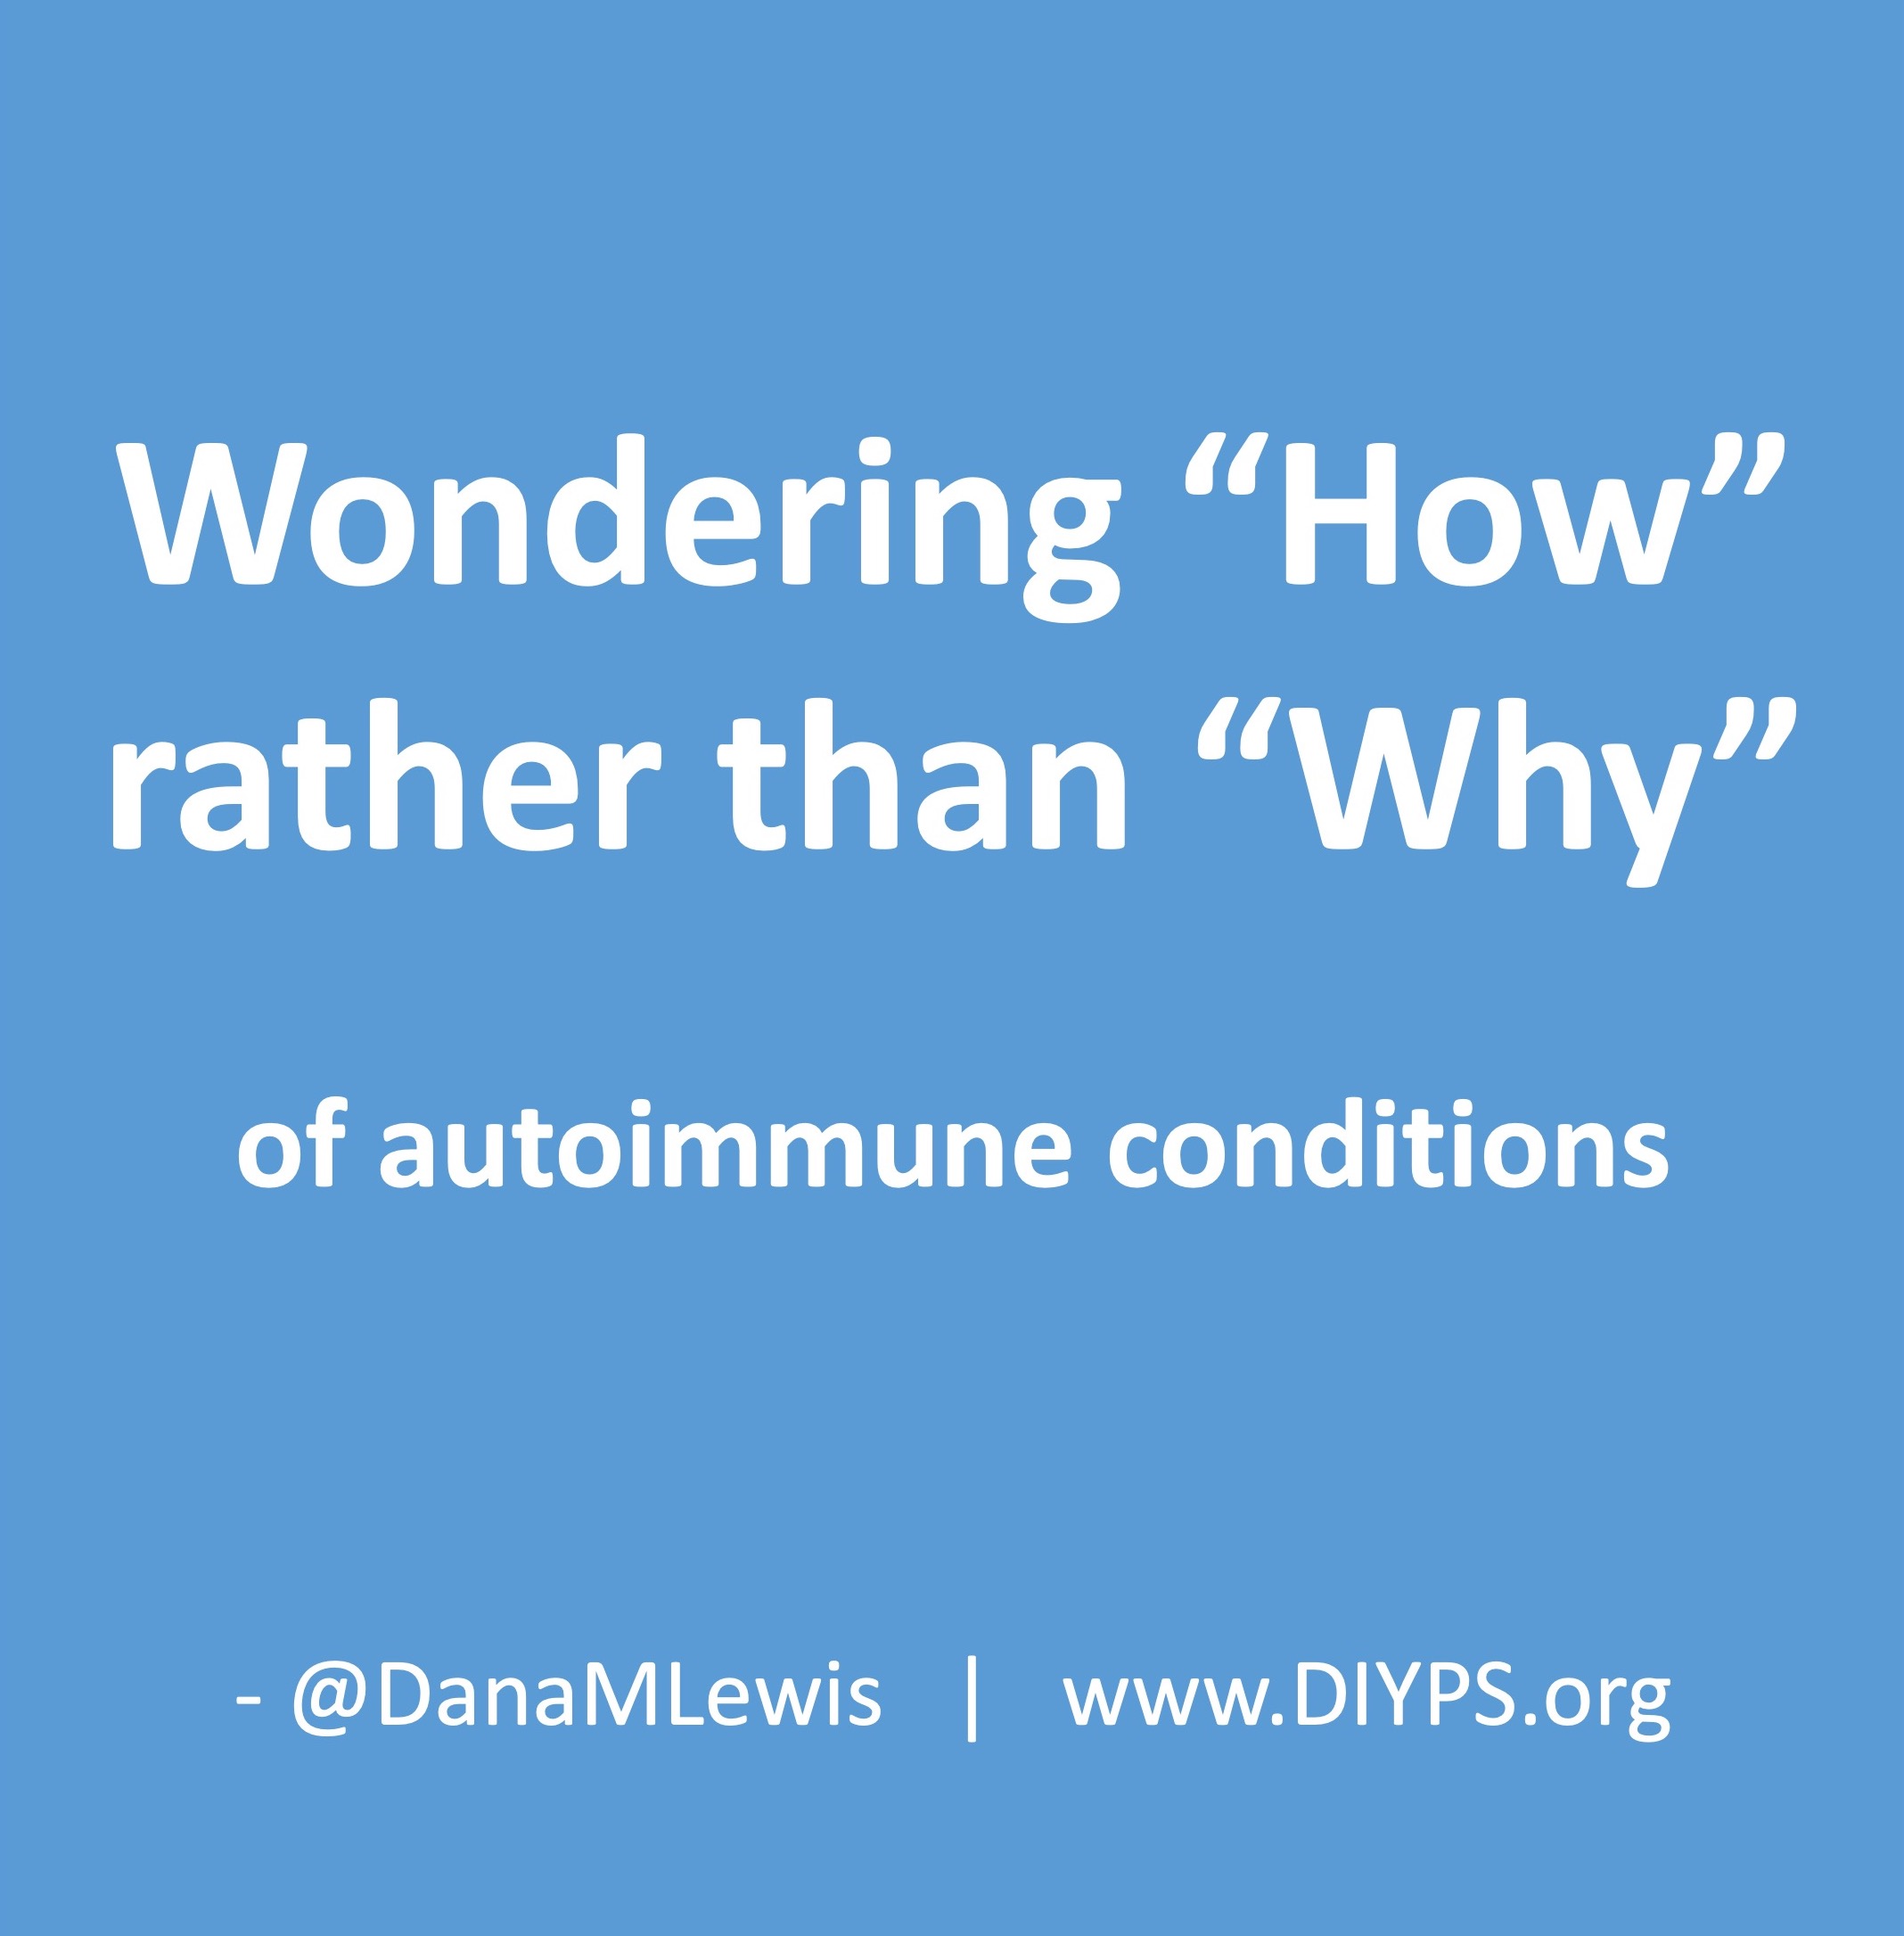 Wondering "how" rather than "why" of autimmune conditions, by @DanaMLewis from DIYPS.org